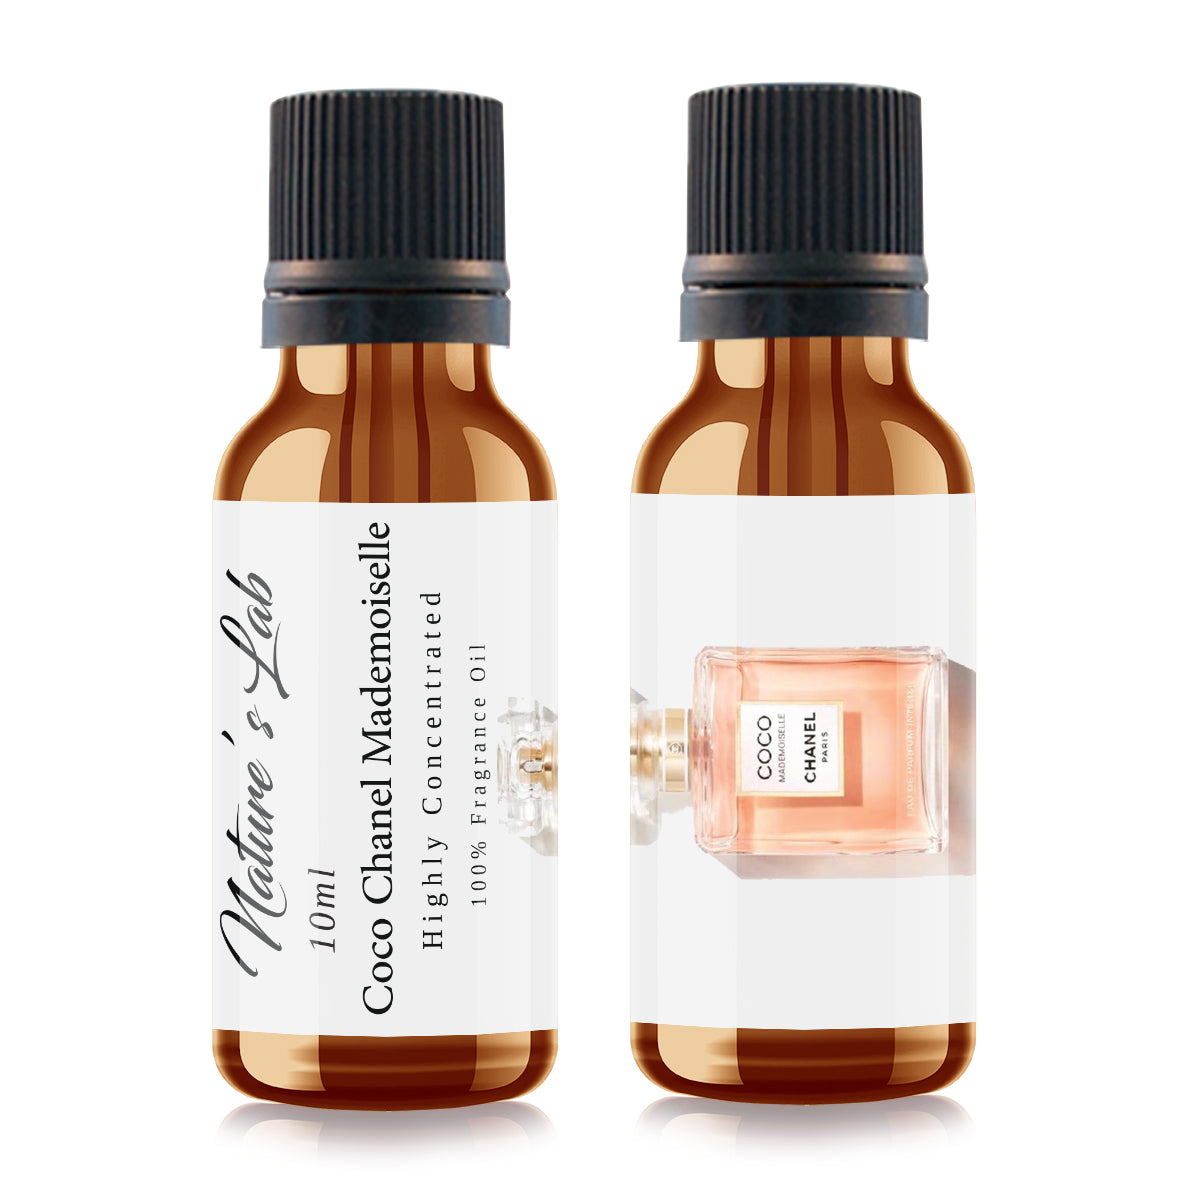 Coco Chanel Mademoiselle Type Fragrance Oil - Natural Sister's